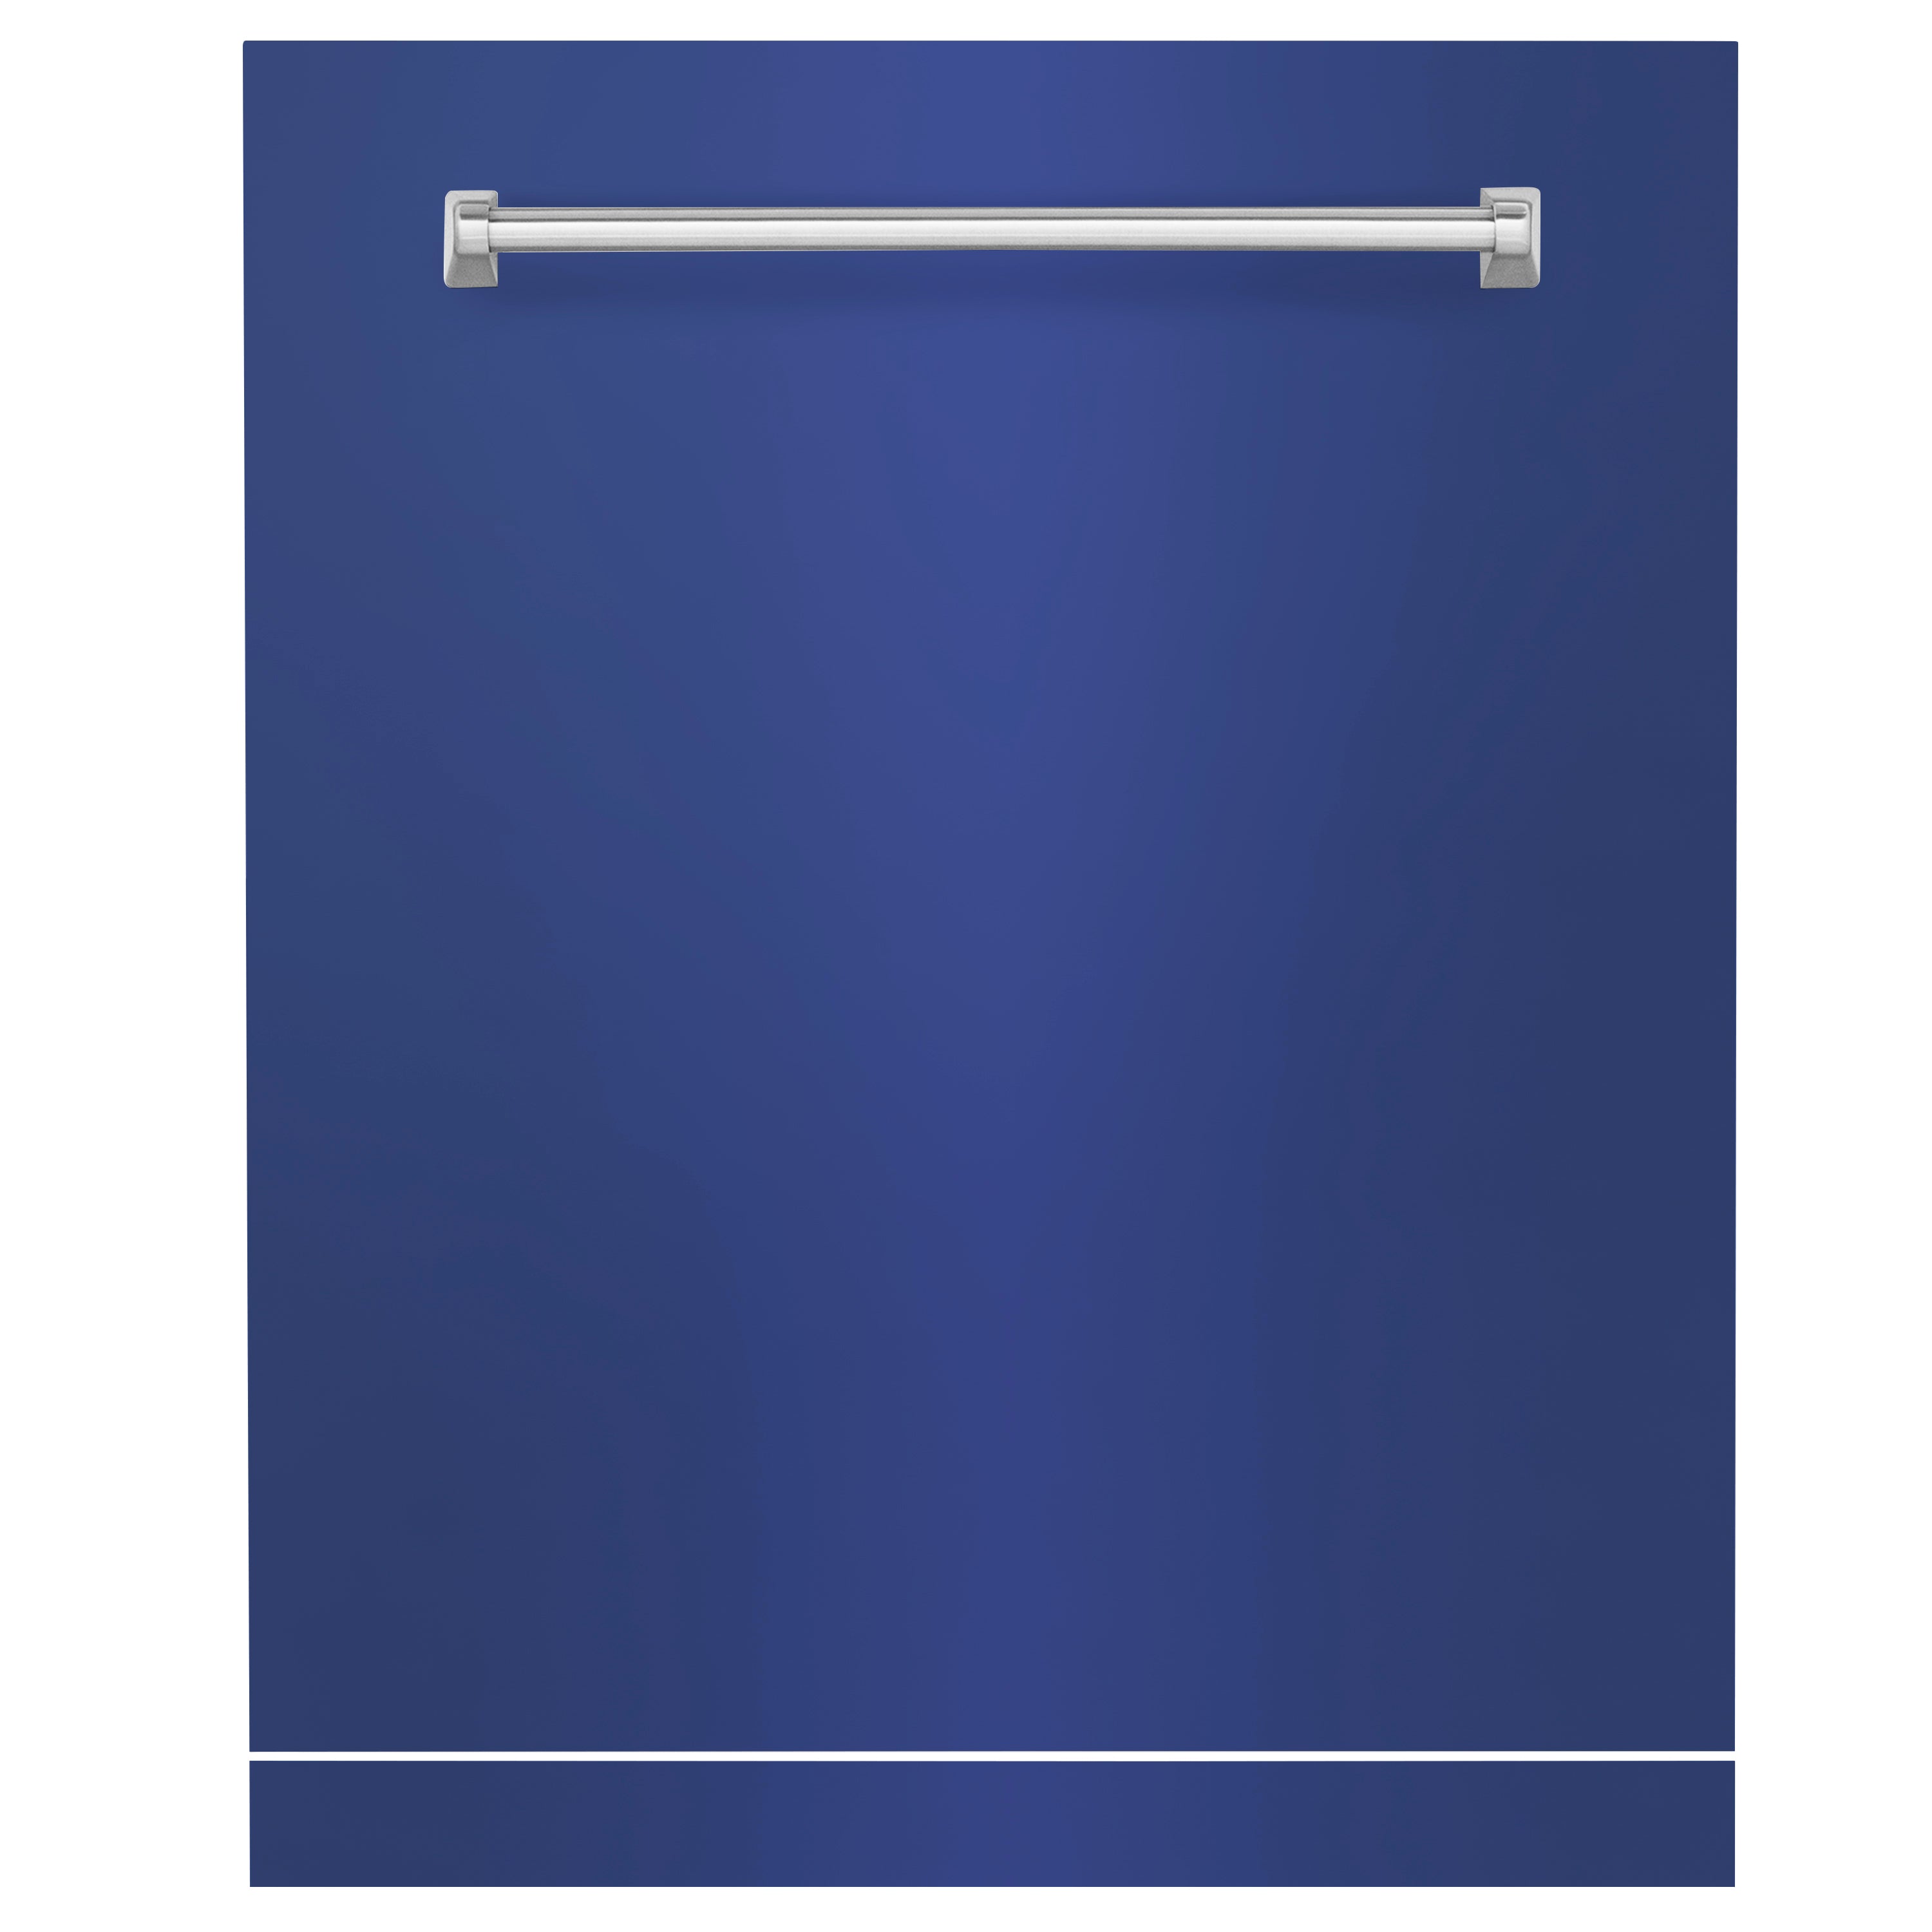 ZLINE 24" Monument Dishwasher Panel with Traditional Handle in Blue Matte with Kickplate